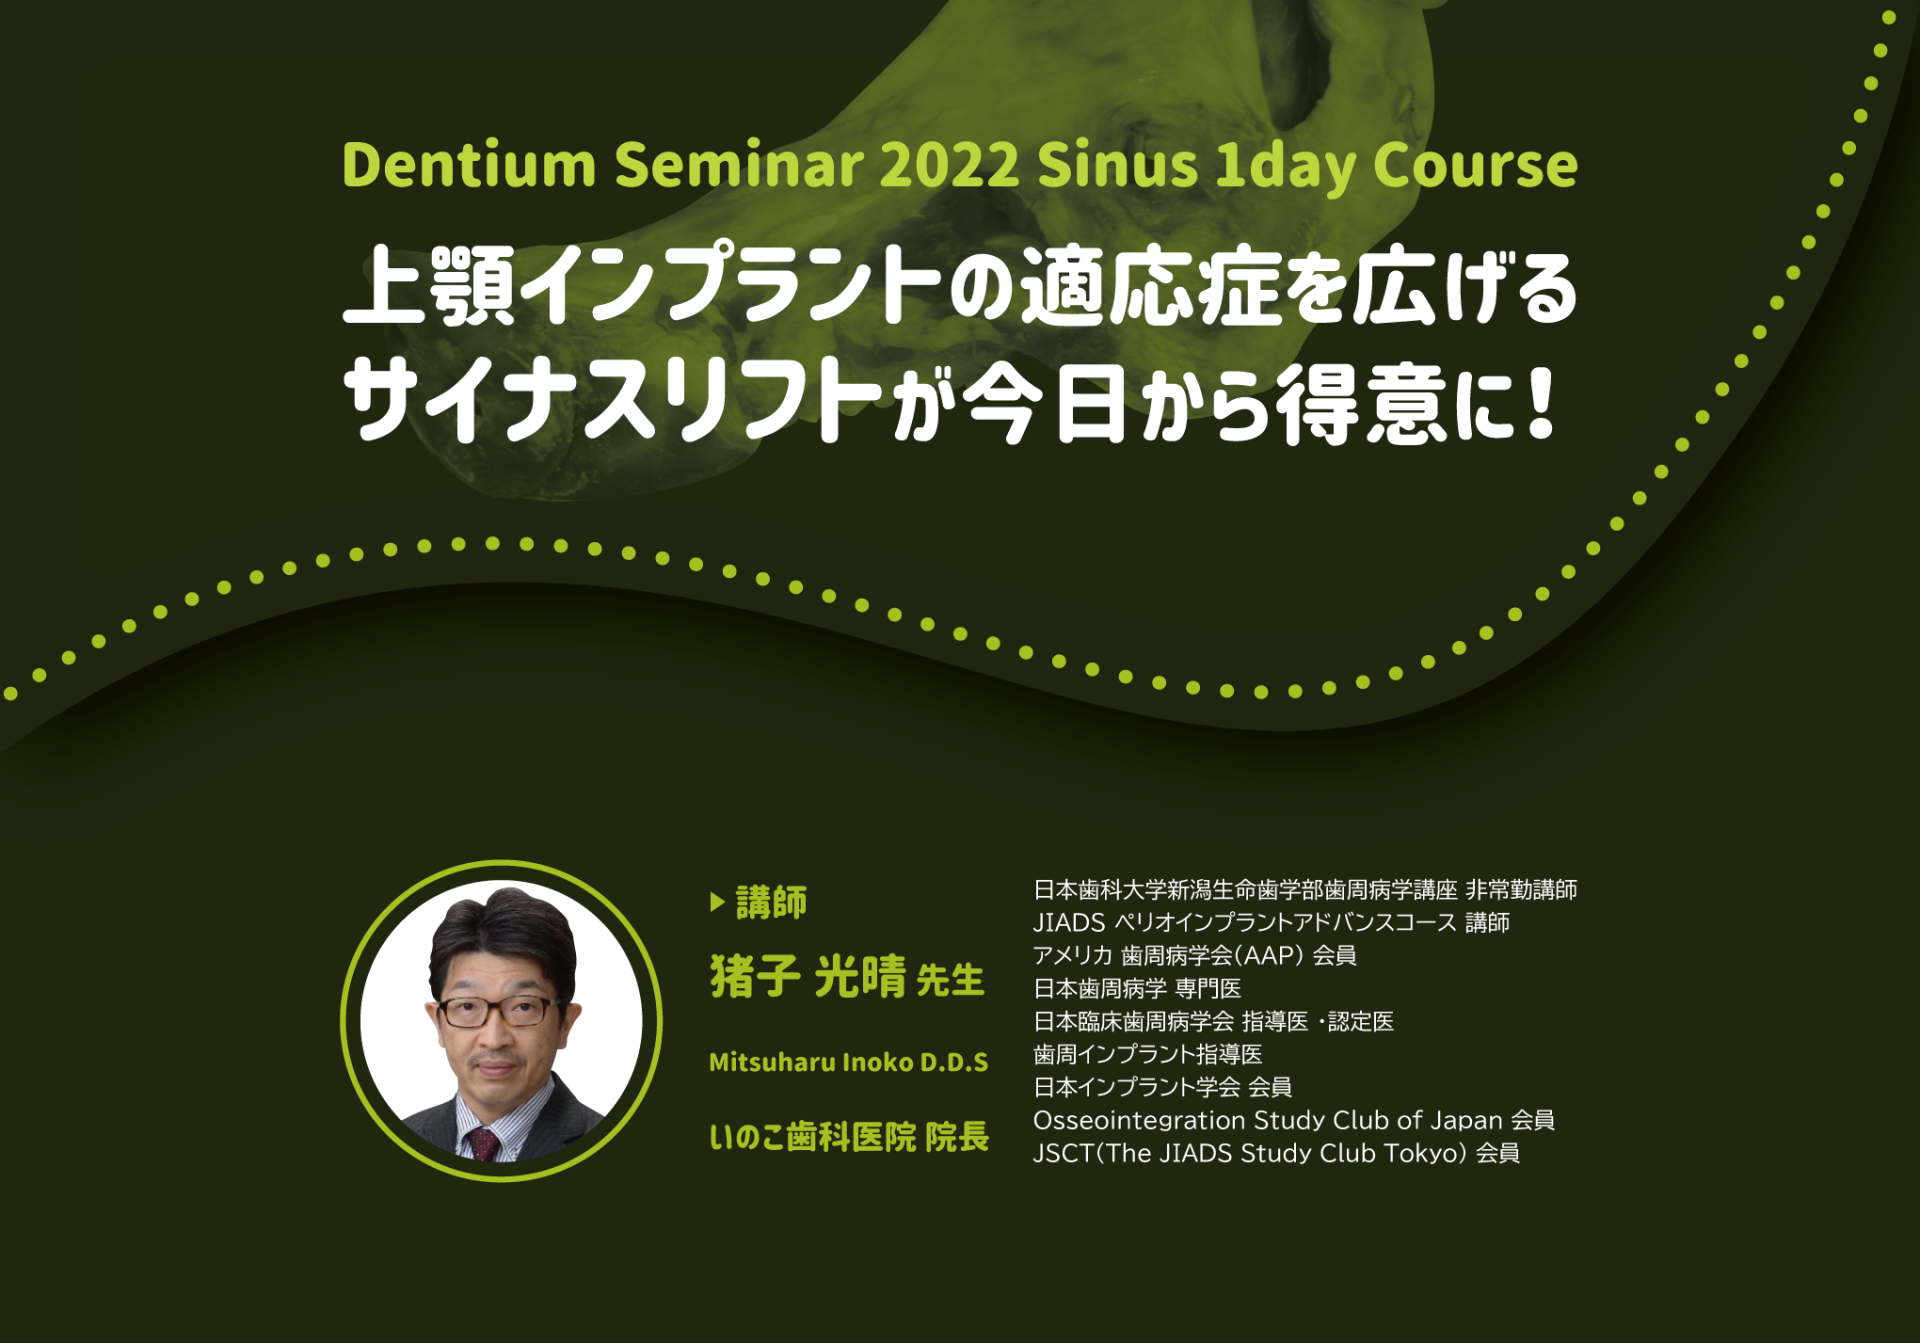 2022 Sinus 1day Course in Tokyo